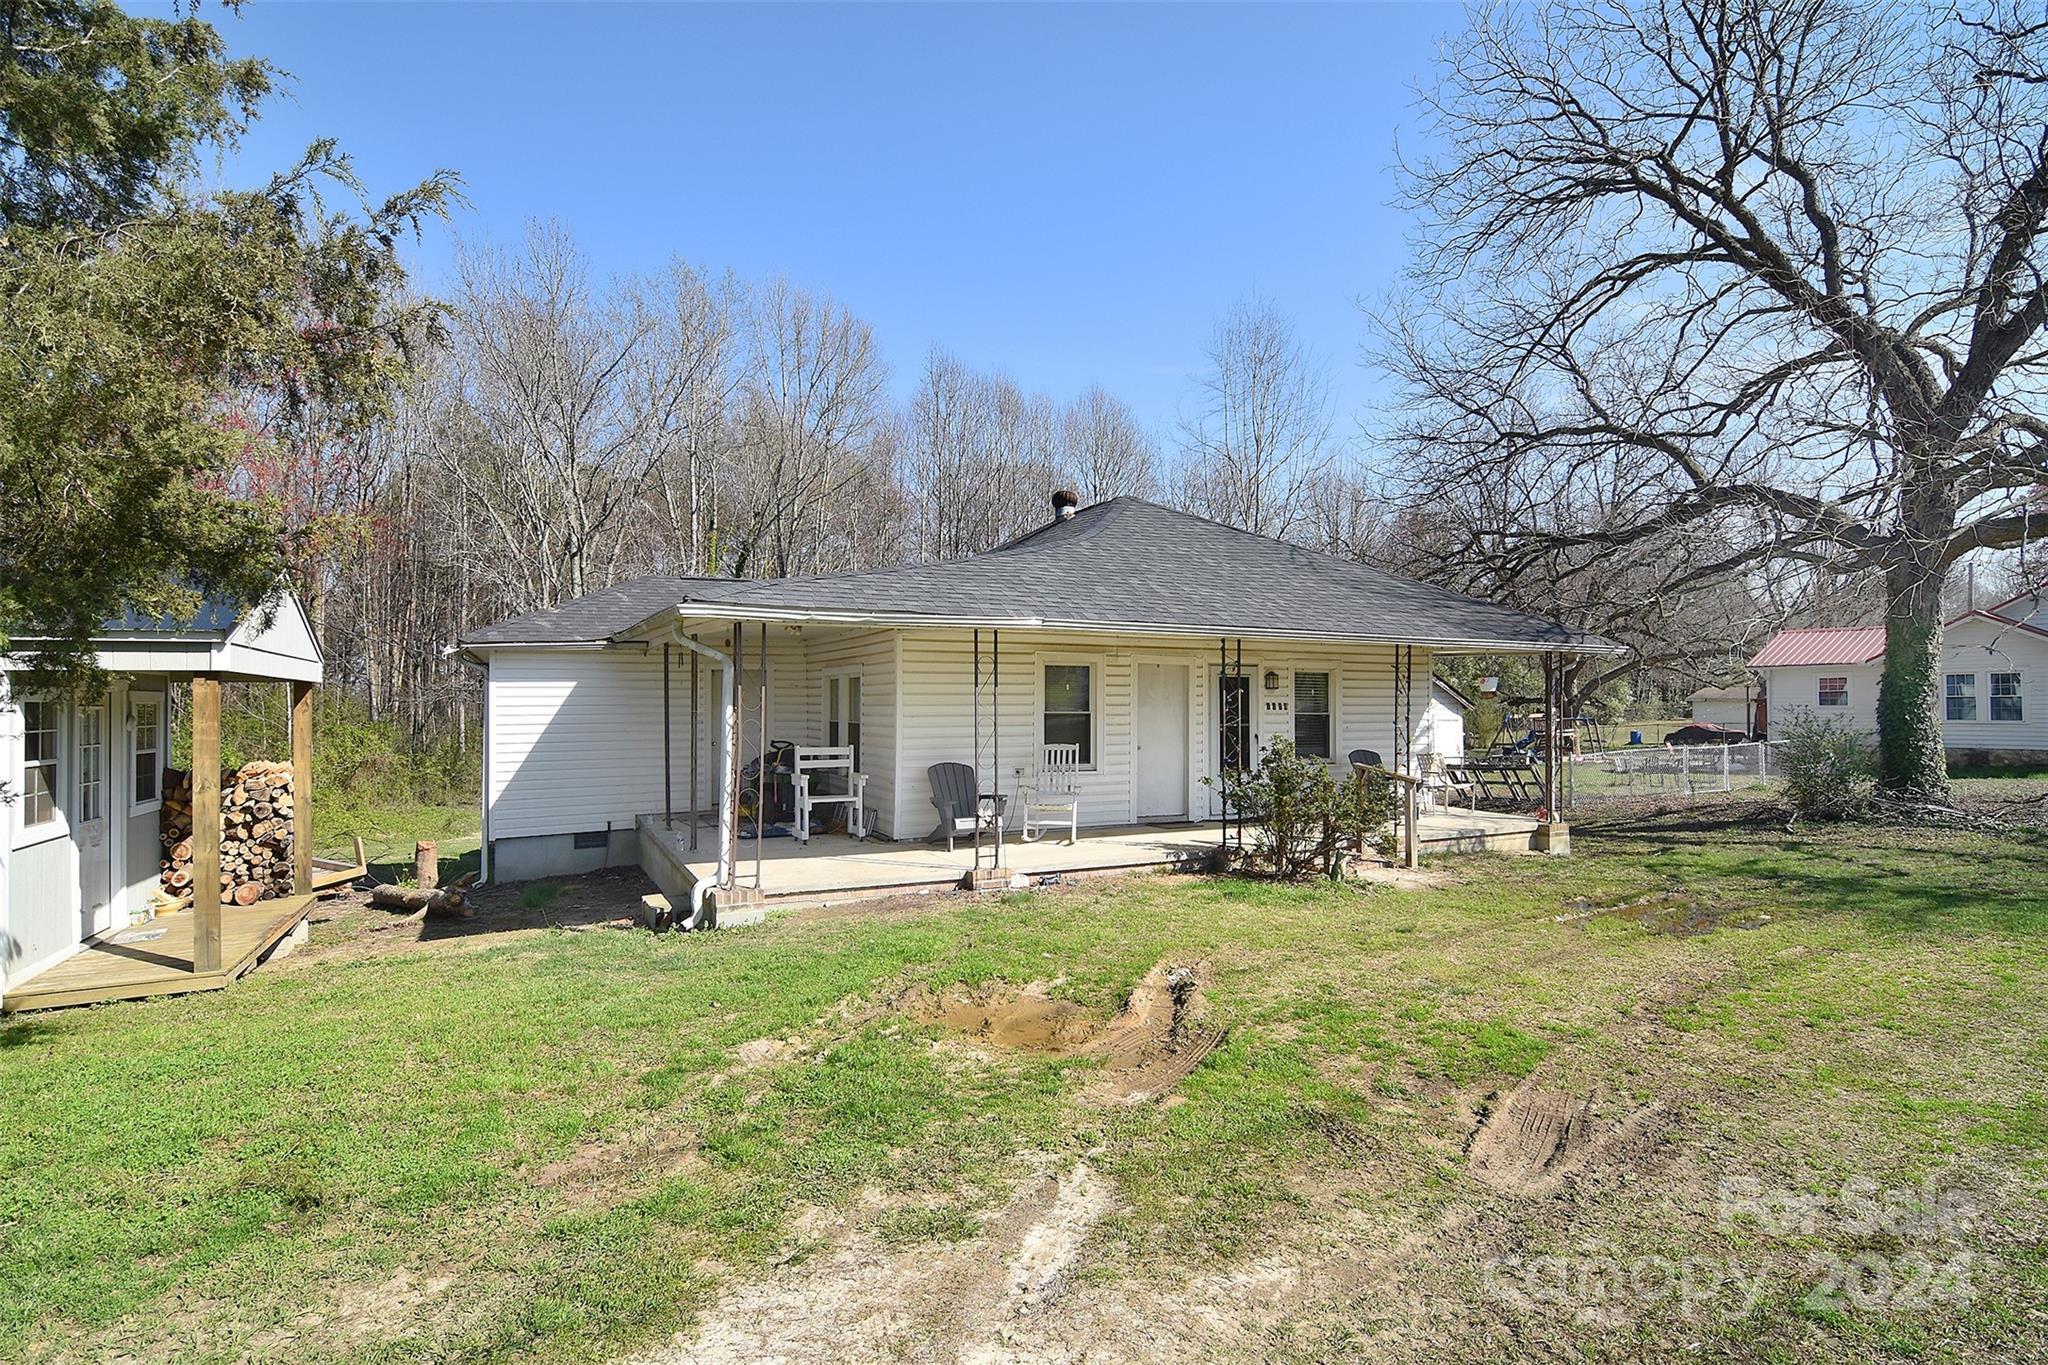 Photo one of 1118 Tryon Courthouse Rd Bessemer City NC 28016 | MLS 4118780